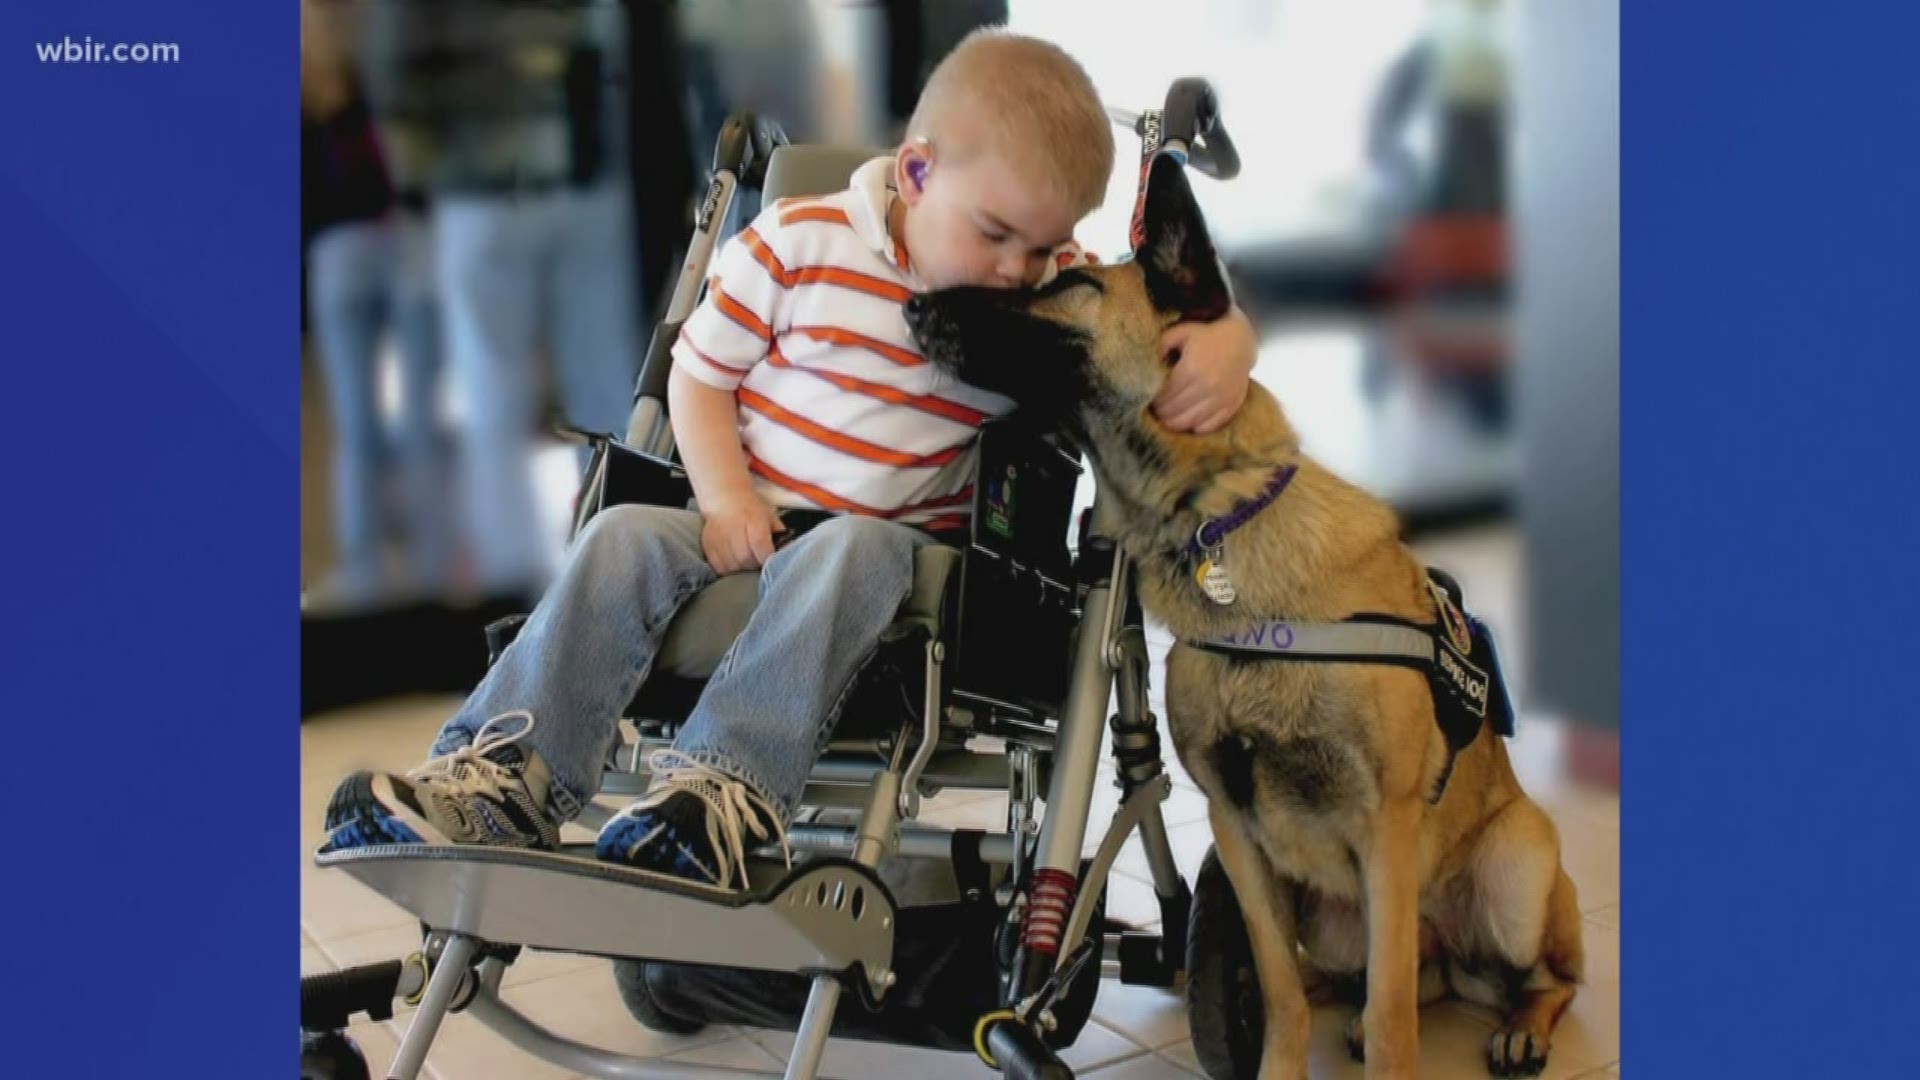 A dog that was hours away from being euthanized was rescued to become a service dog for a special little boy. Dec. 4, 2019-4pm.